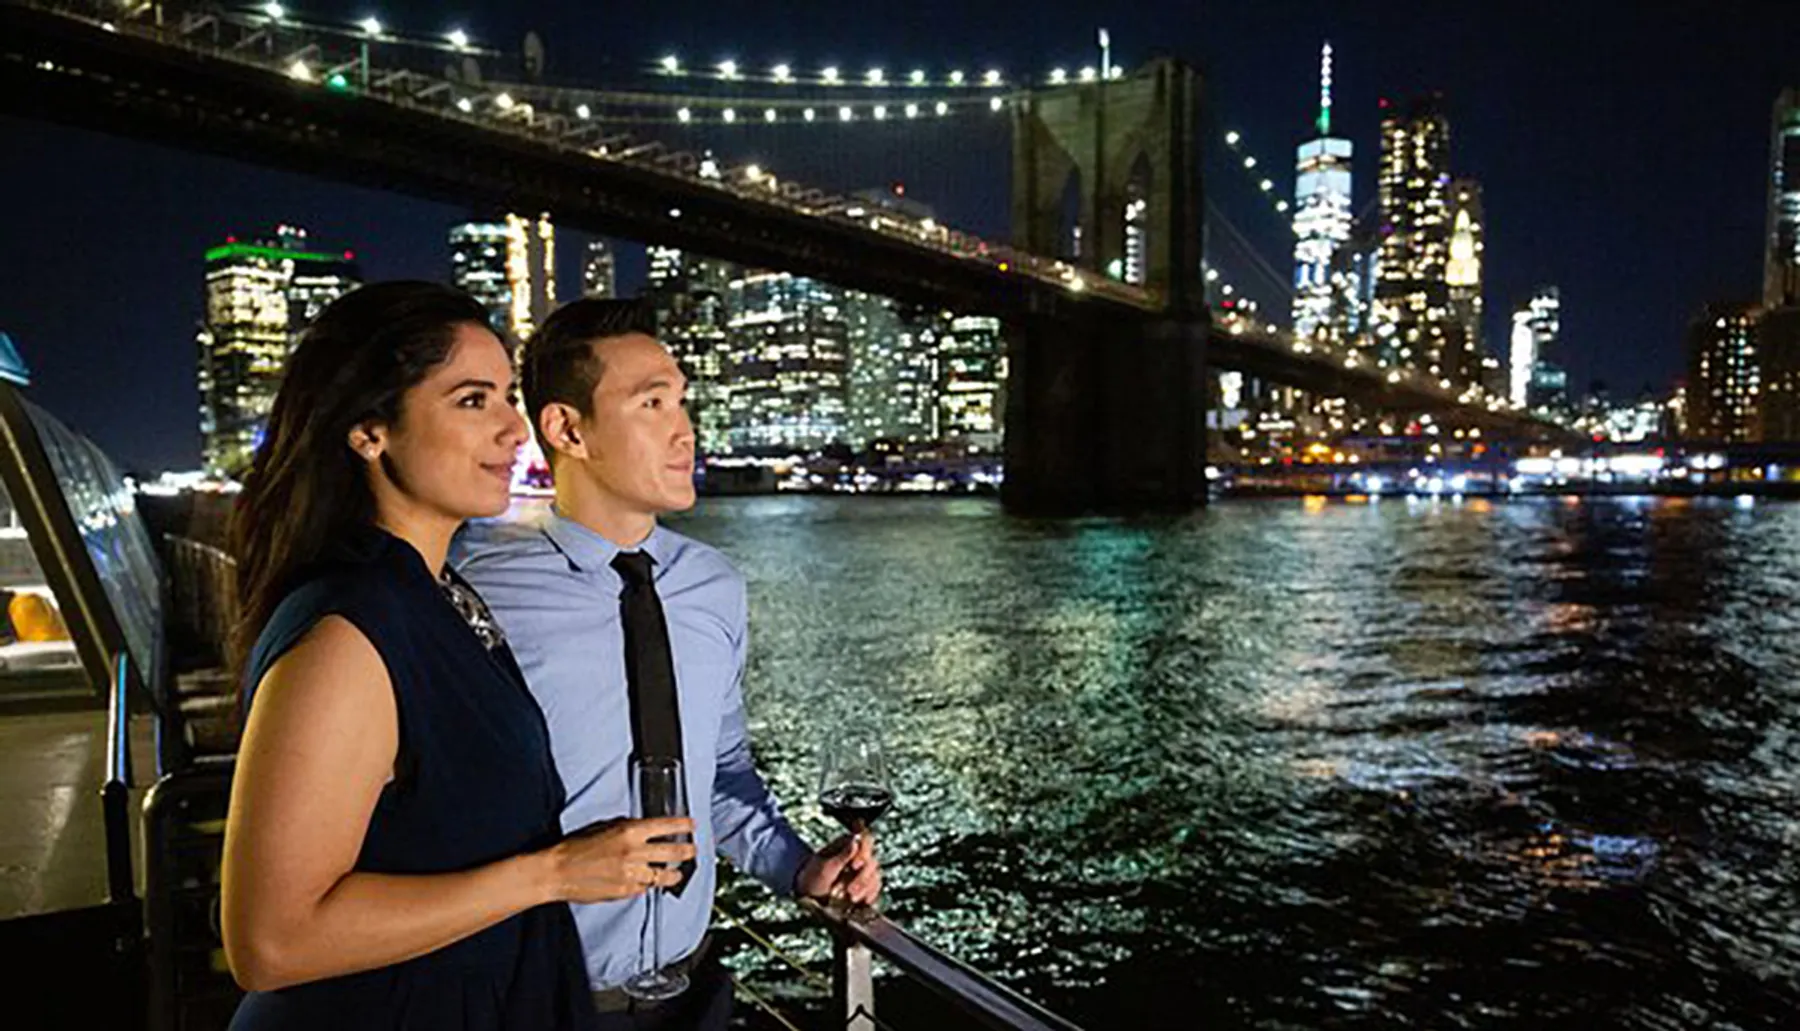 A couple enjoys a nighttime view of a lit-up cityscape with a prominent bridge in the background, while holding glasses of wine.